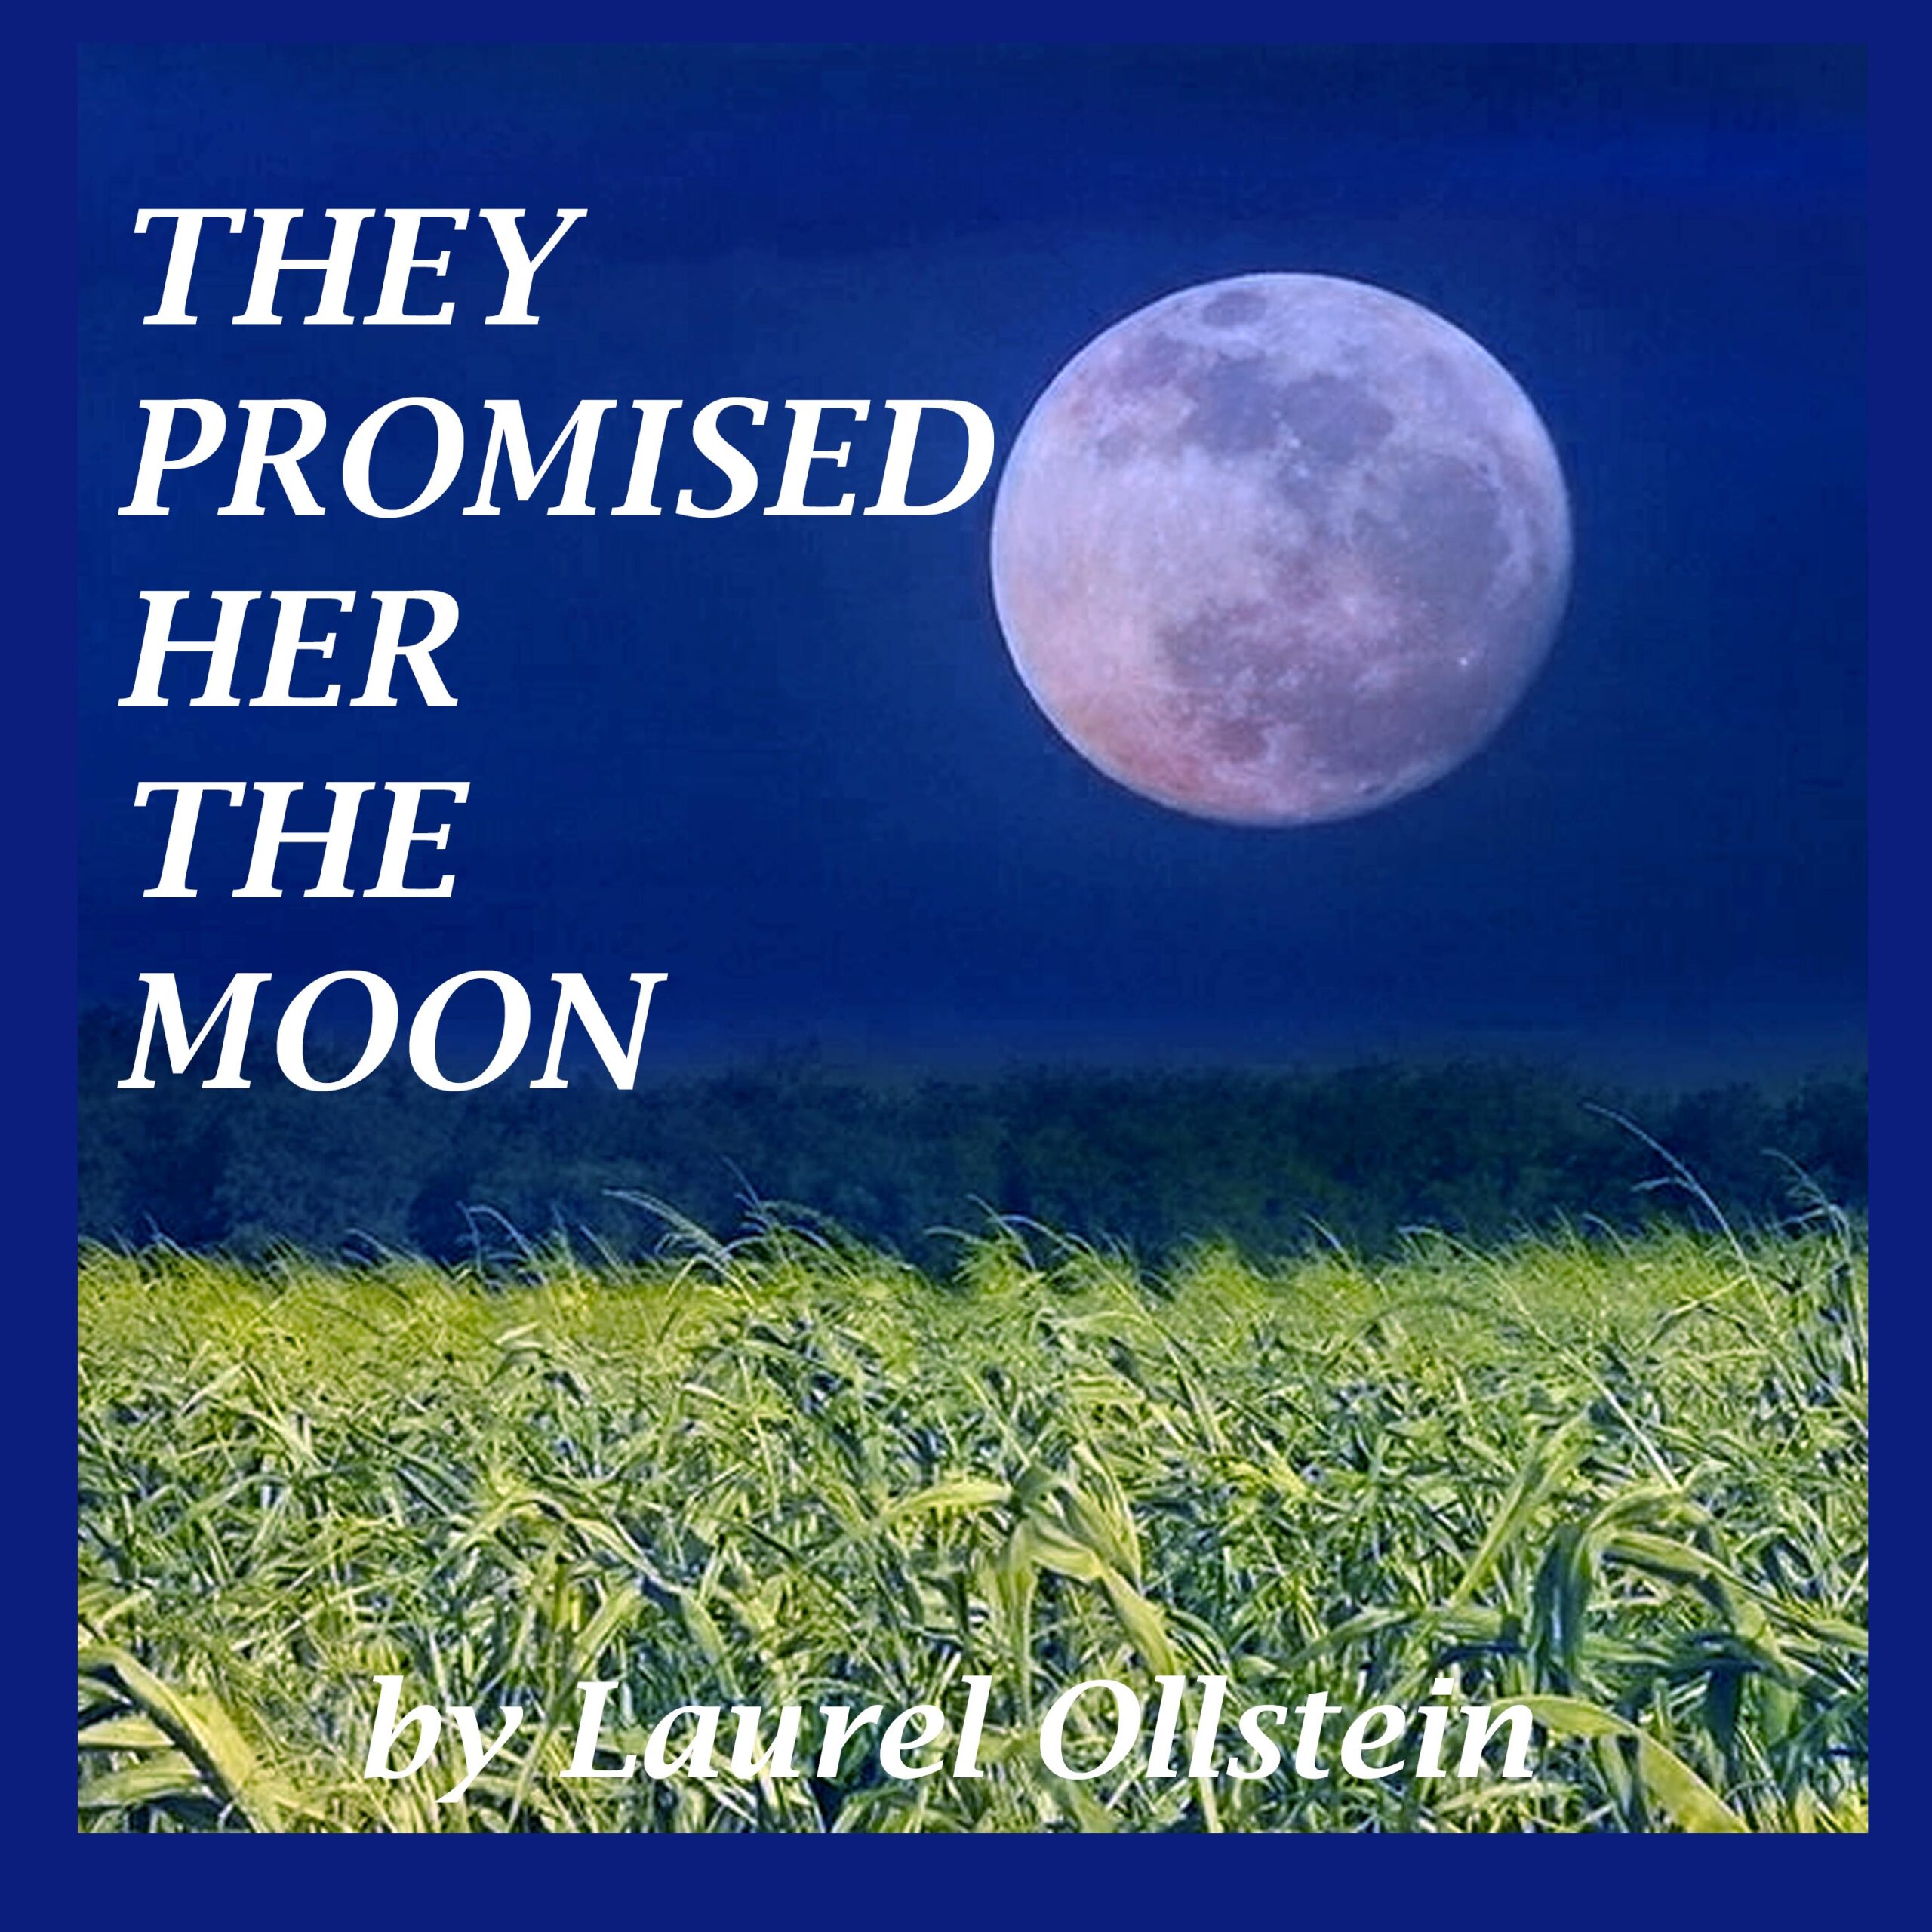 “They Promised Her The Moon” Tells the story of Pilot and Aviator Jerrie Cobb